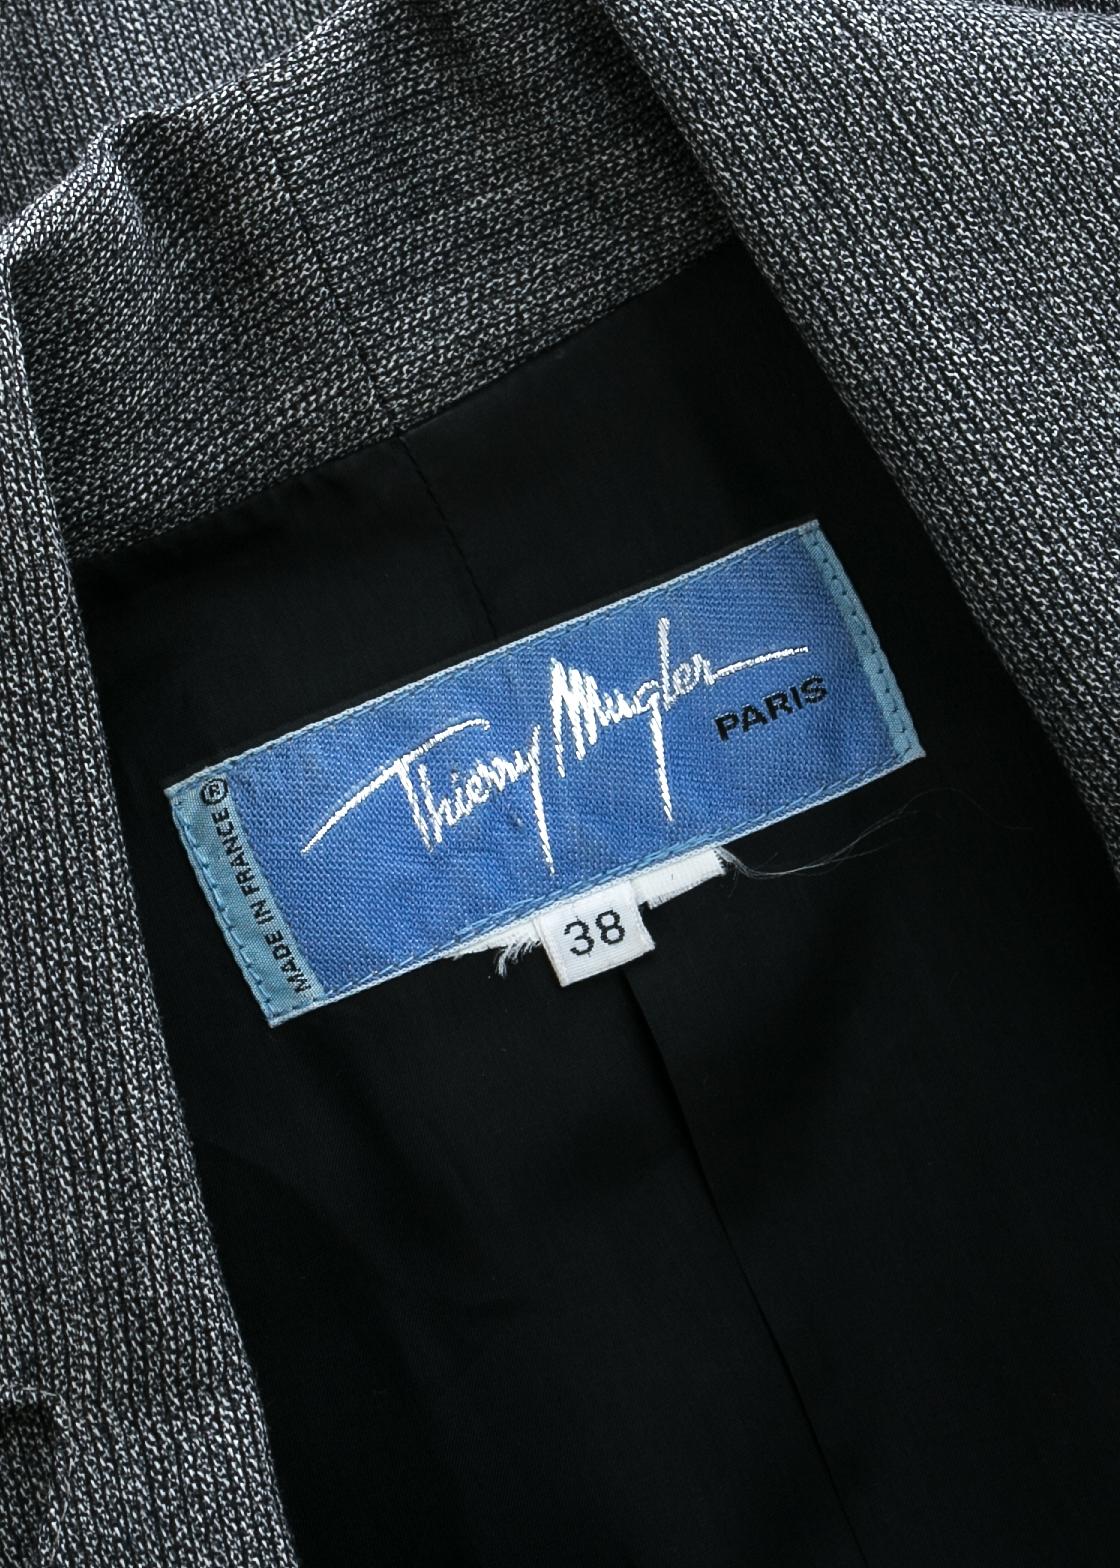 Thierry Mugler grey wool structured skirt suit, c. 1990s For Sale at ...